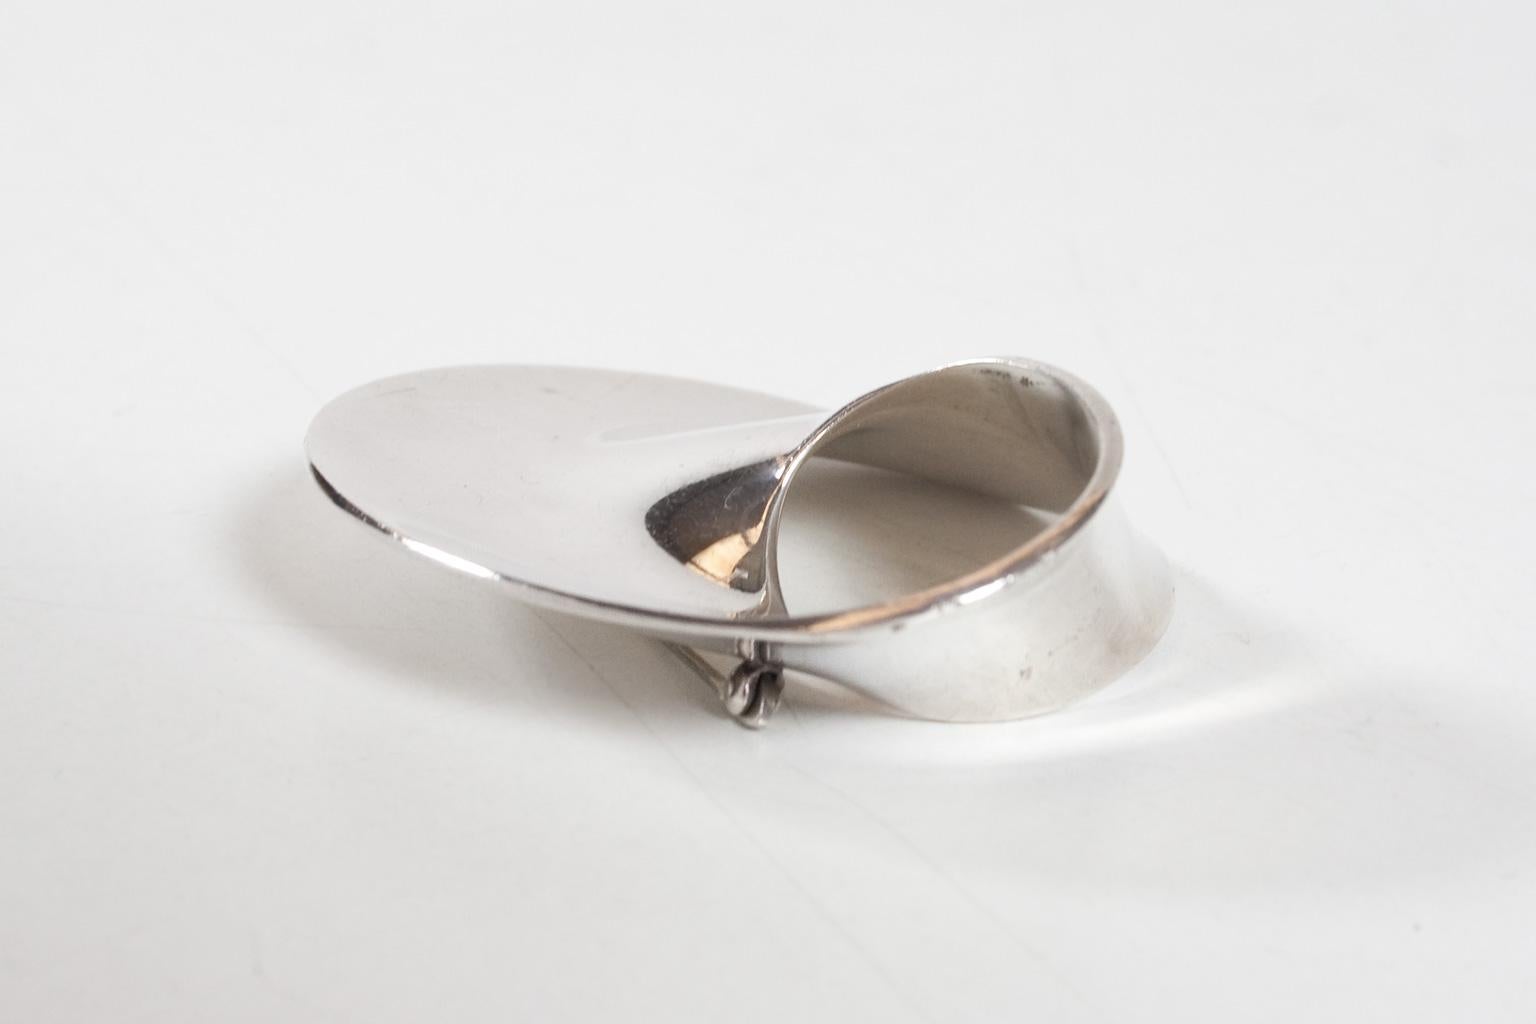 Eye catching, intriguing and elegant Scandinavian Modern Sterling silver brooch, model “Möbius” by Vivianna Torun. This vintage item is in very good condition, lock works smoothly, some light traces of use on the silver, as shown on photos. The